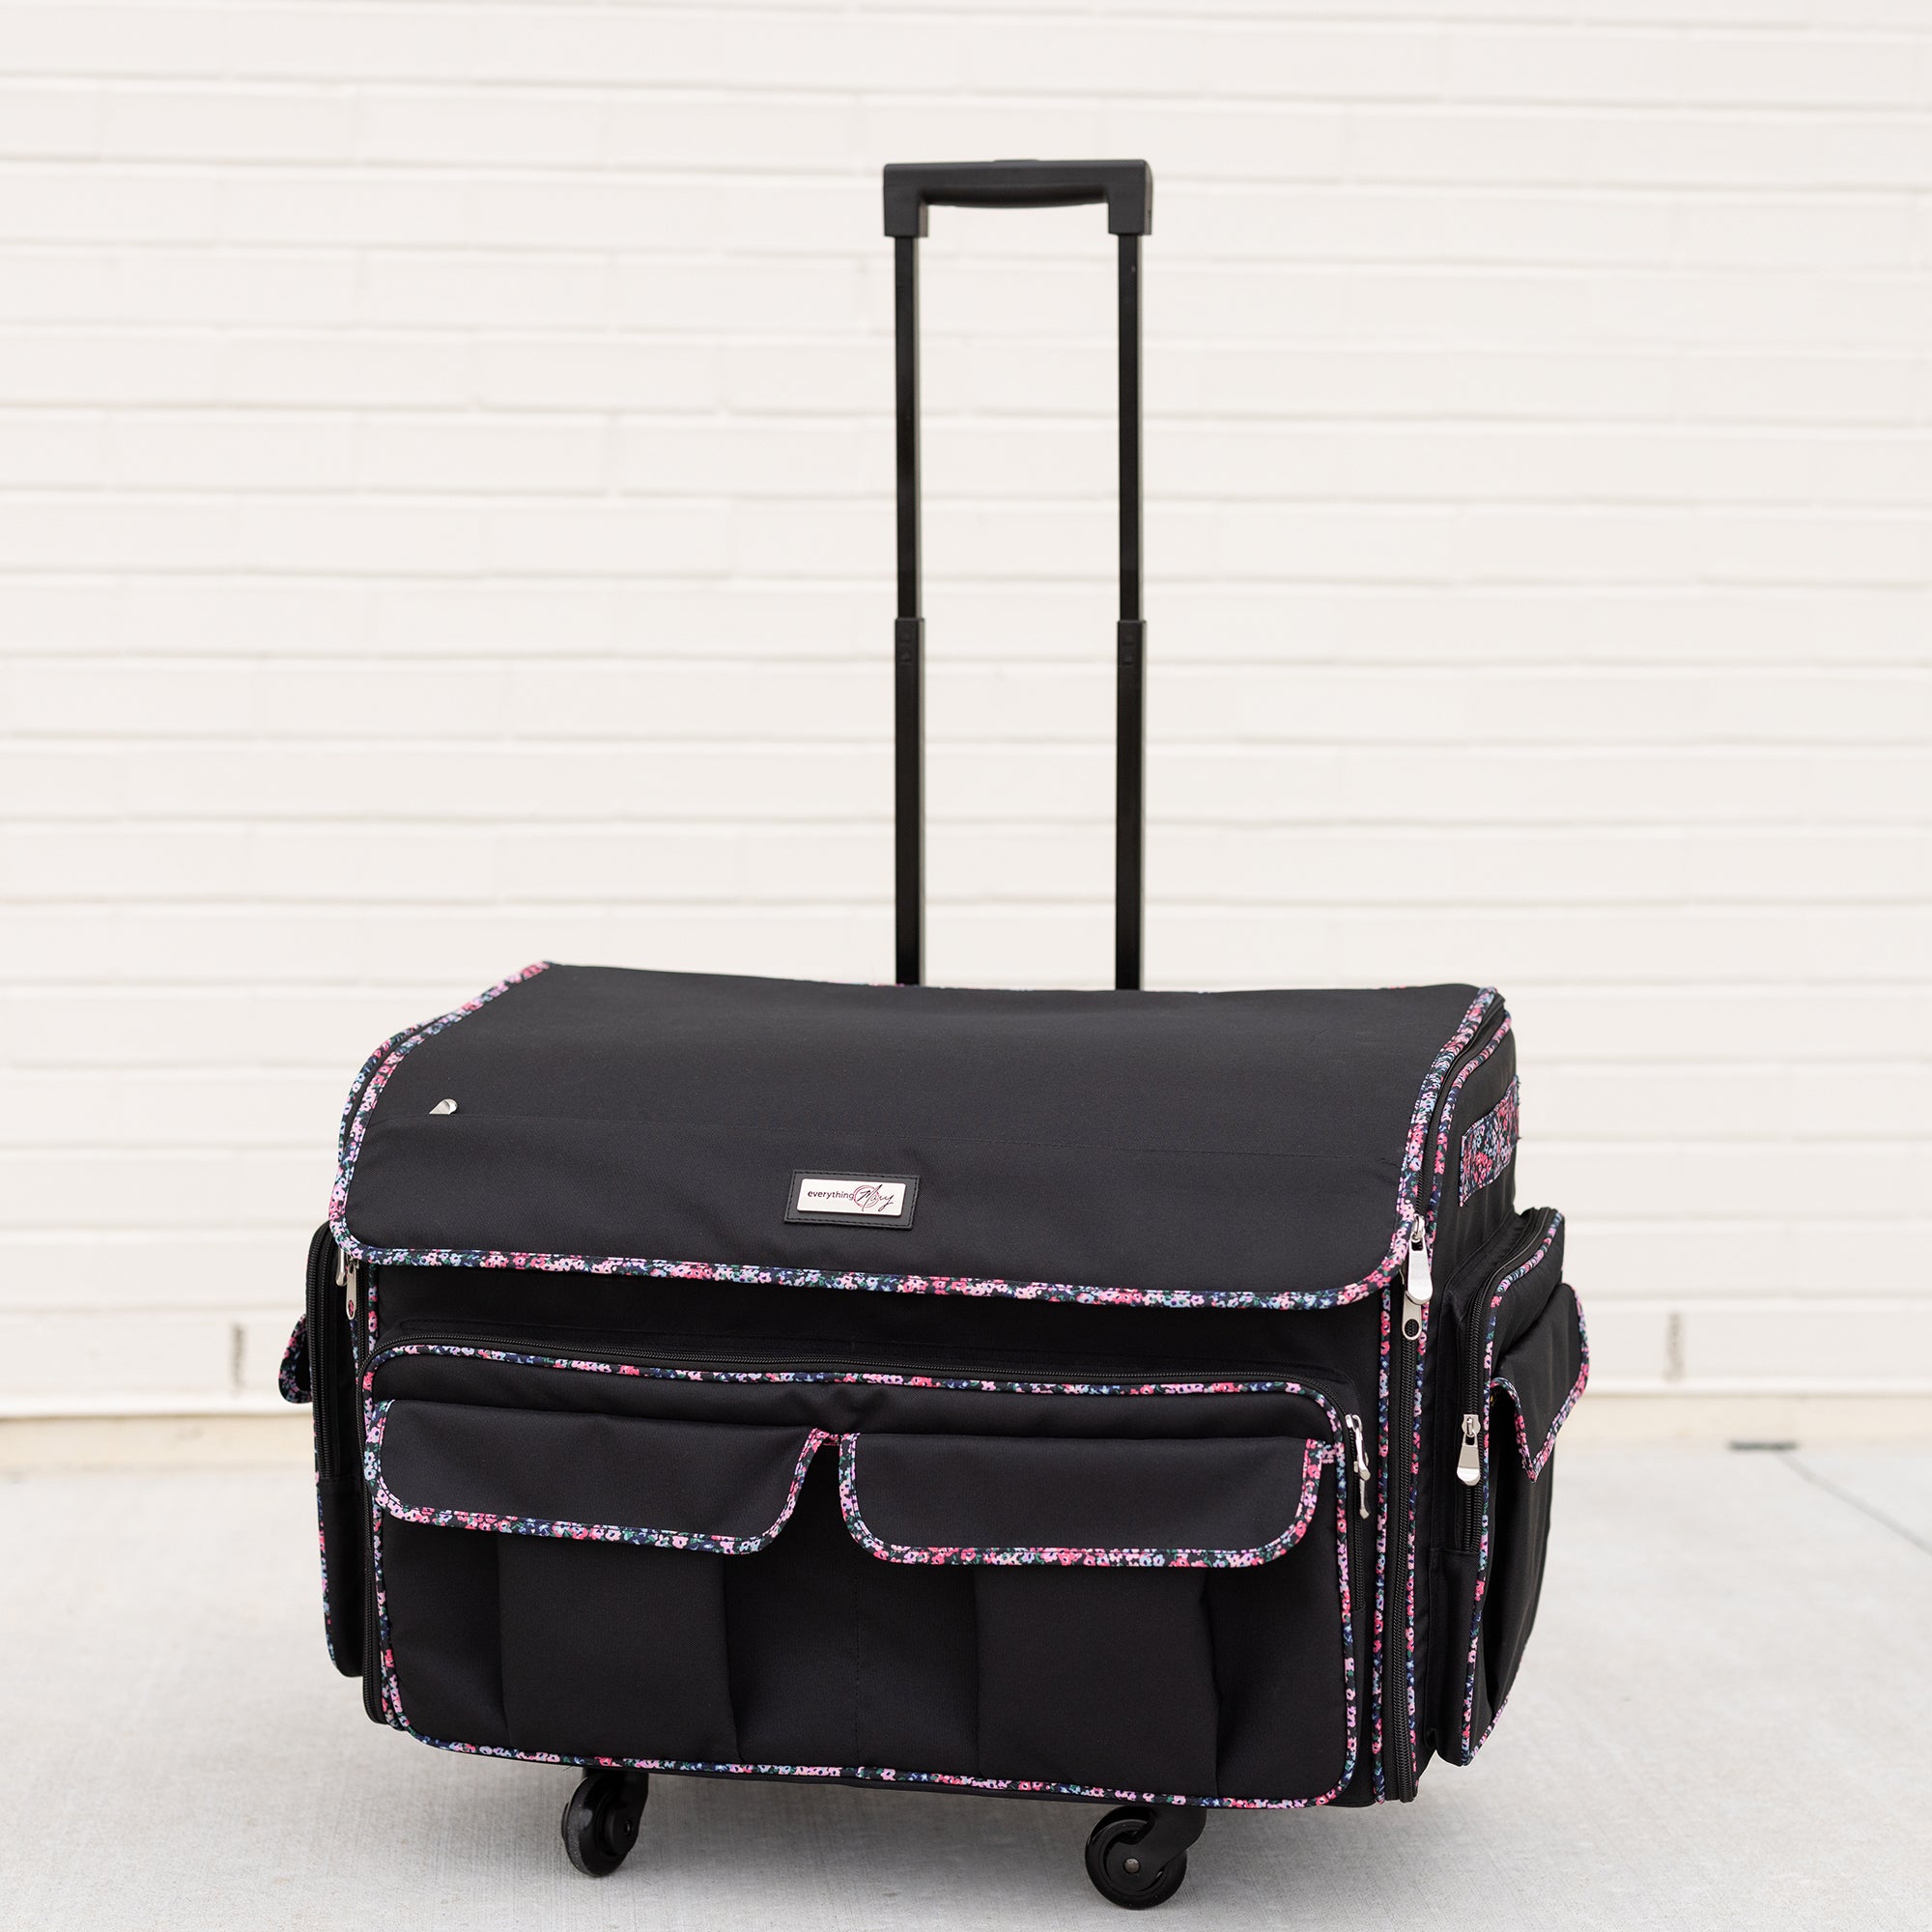 XL 4 Wheel Collapsible Deluxe Rolling Sewing Machine Storage Case, Black &  Floral